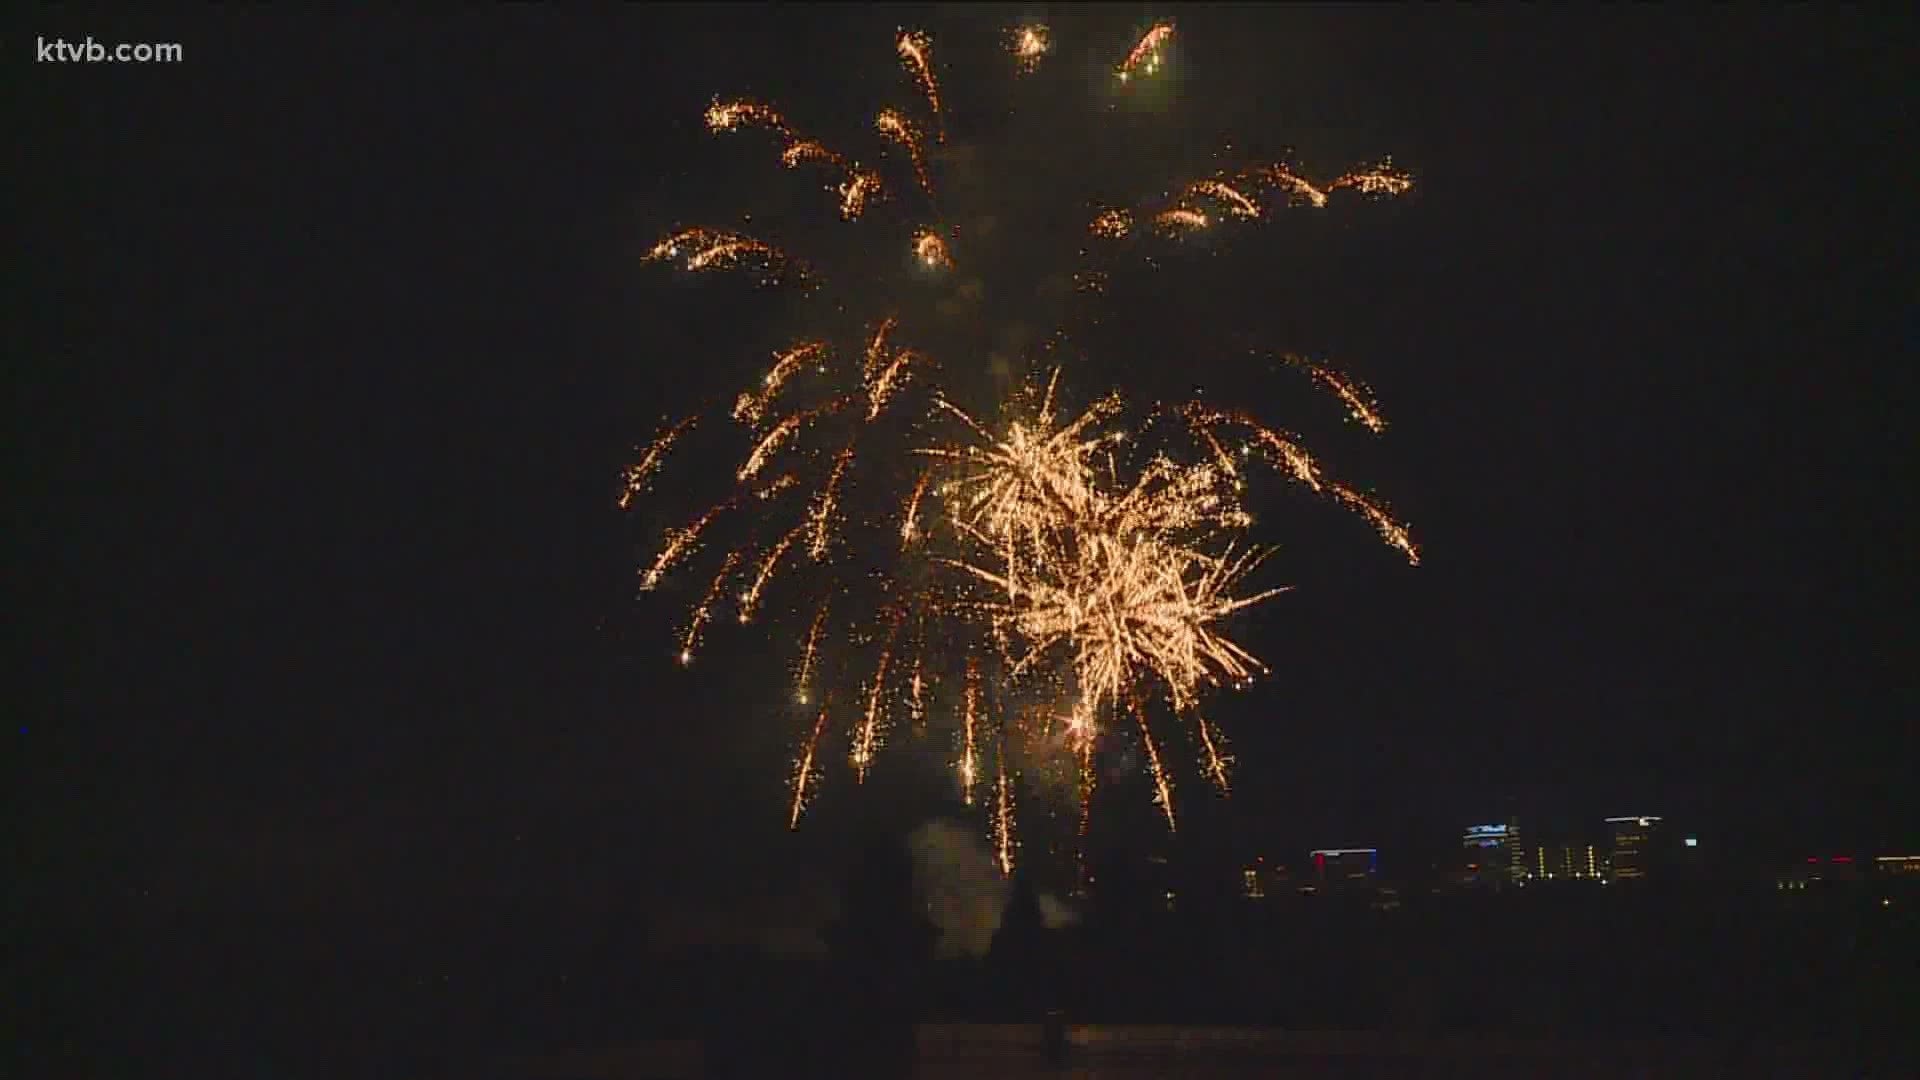 The fireworks will be launched on the 4th at Ann Morrison Park in Boise.